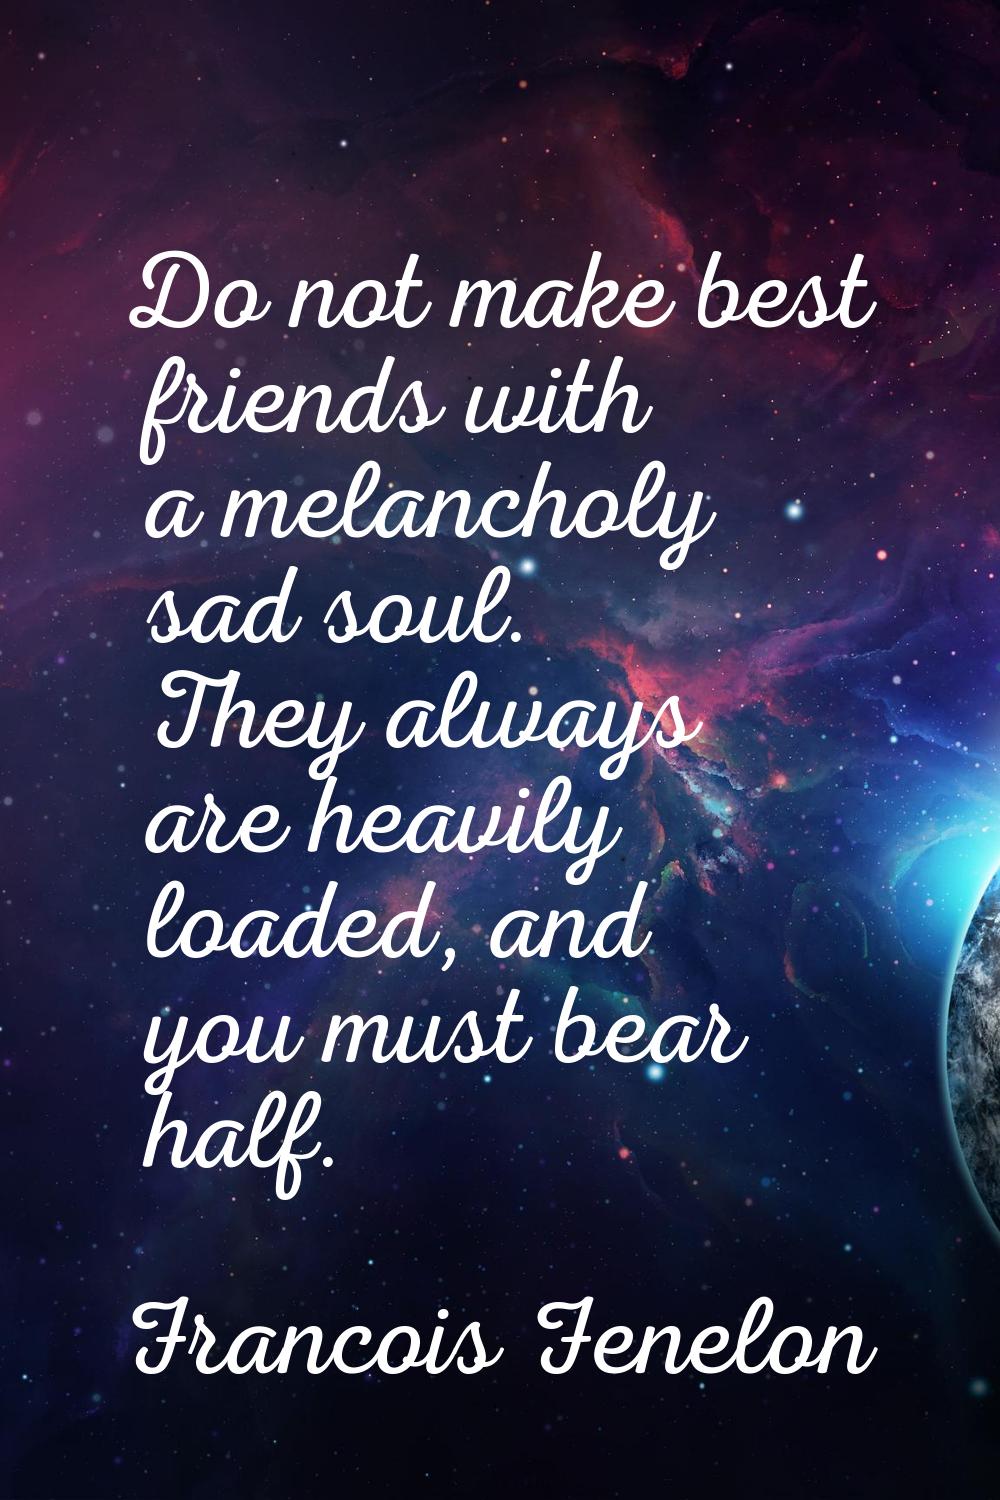 Do not make best friends with a melancholy sad soul. They always are heavily loaded, and you must b